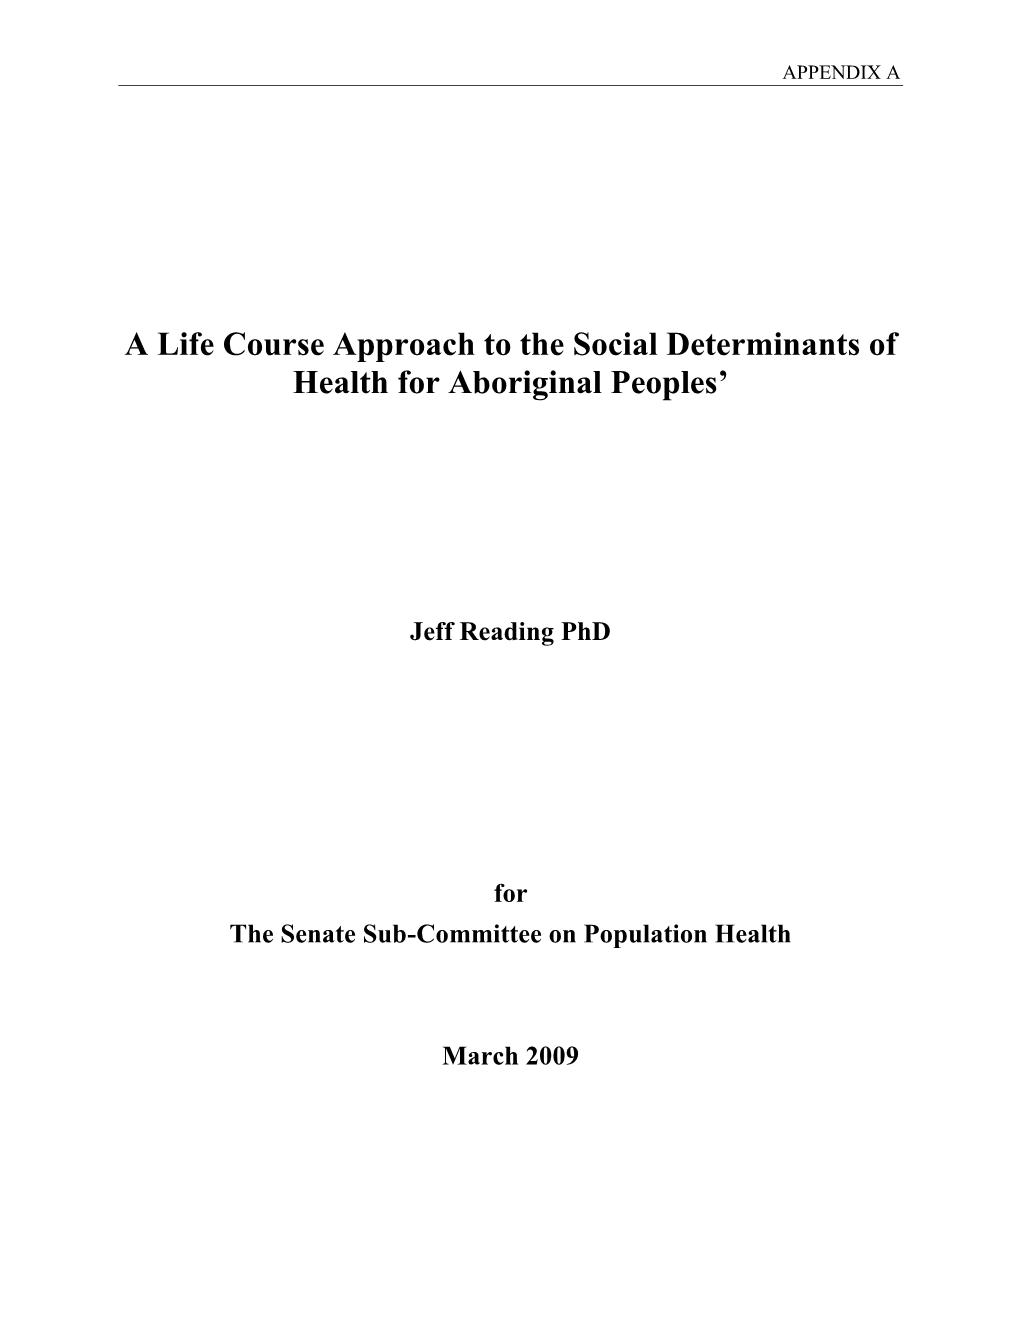 A Life Course Approach to the Social Determinants of Health for Aboriginal Peoples’